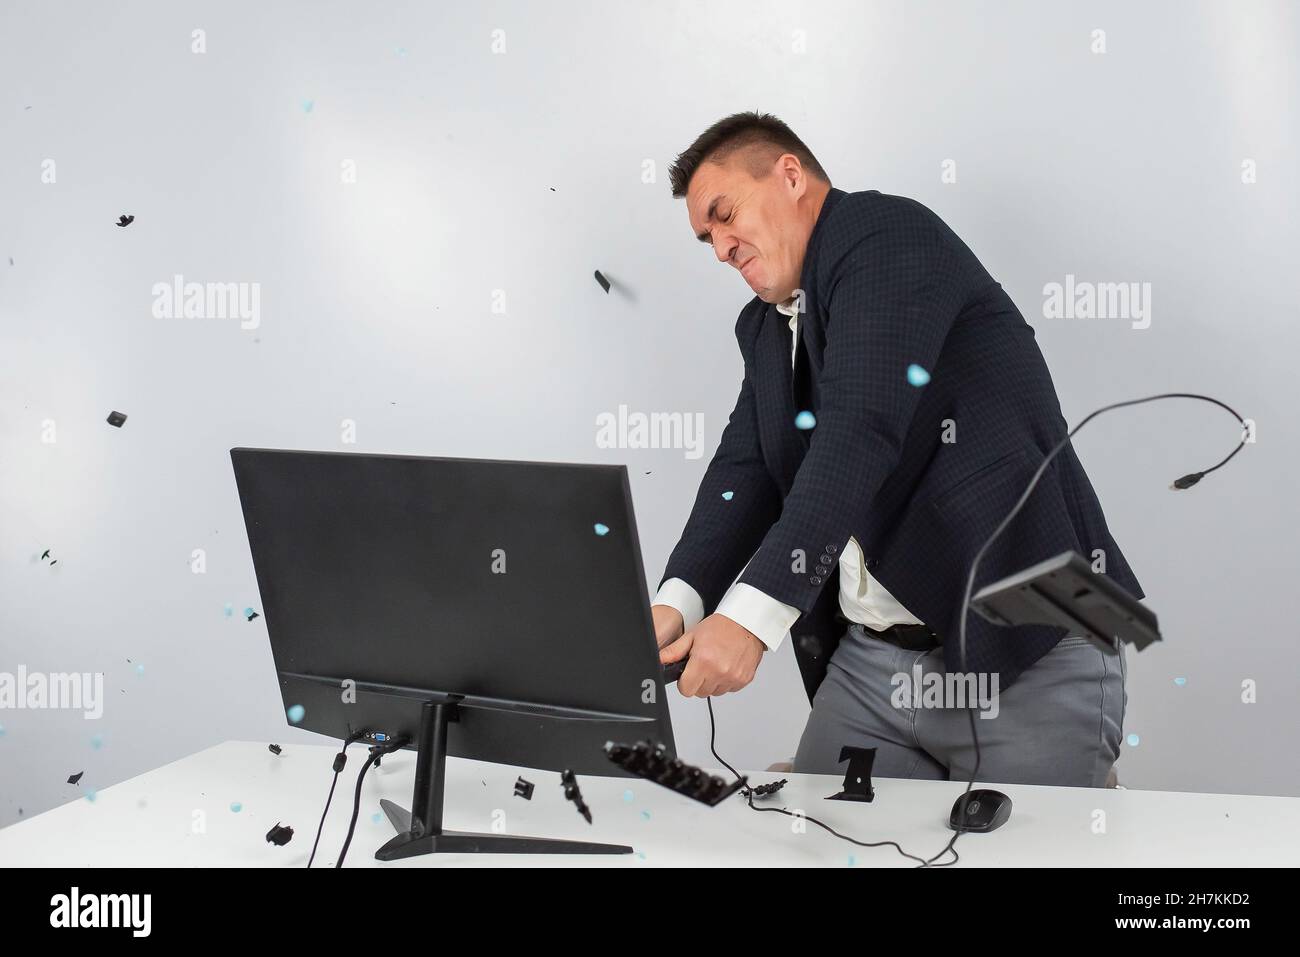 Caucasian man in a suit gets angry and smashes the keyboard on the monitor. An office worker in a rage breaks the computer. Stock Photo